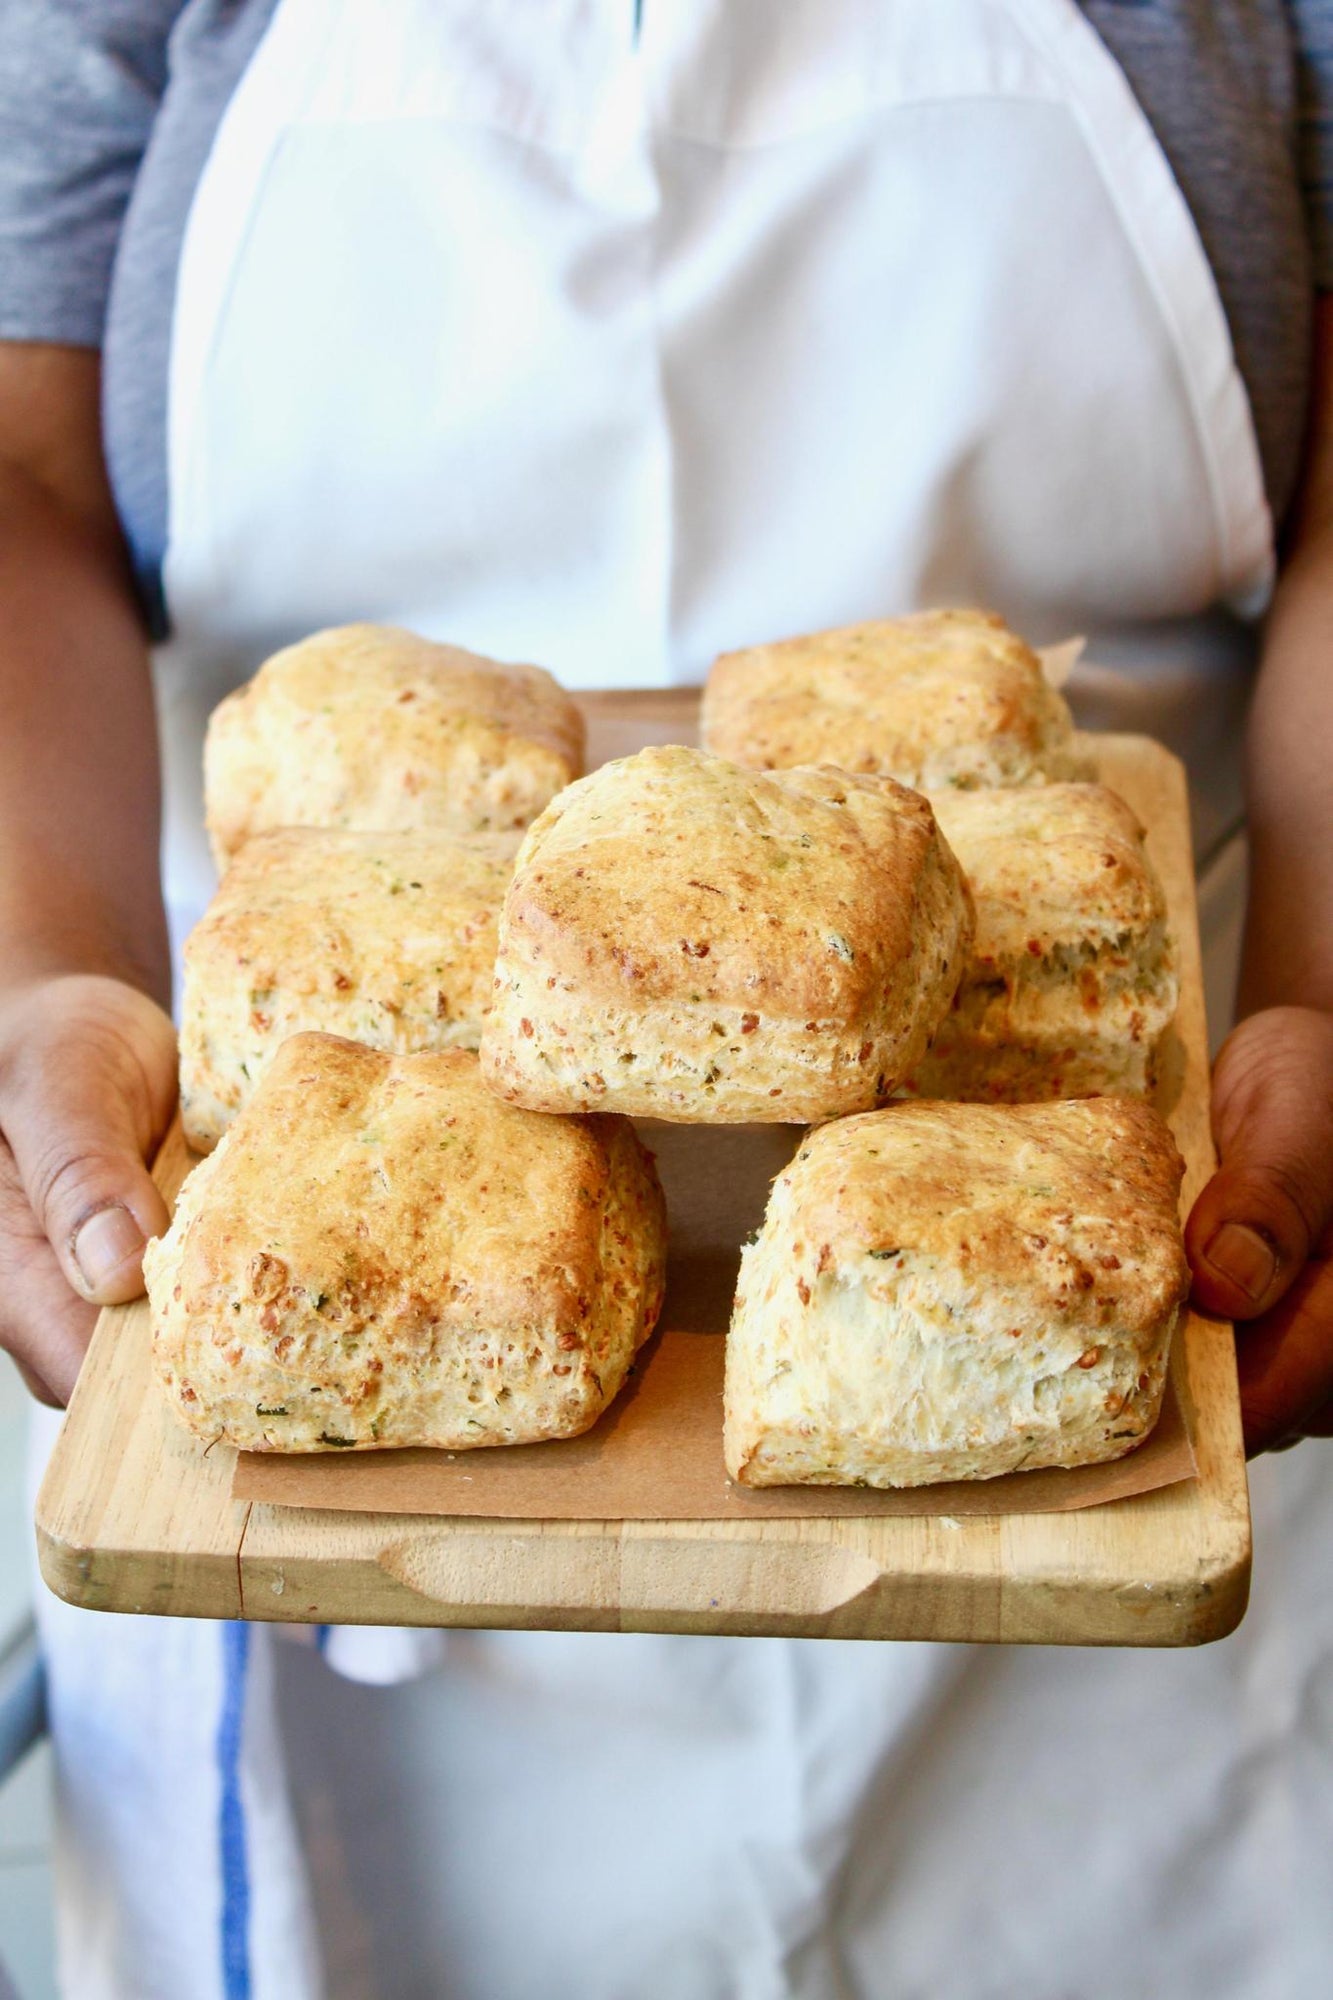 Biscuits | Catering - BKLYN Larder